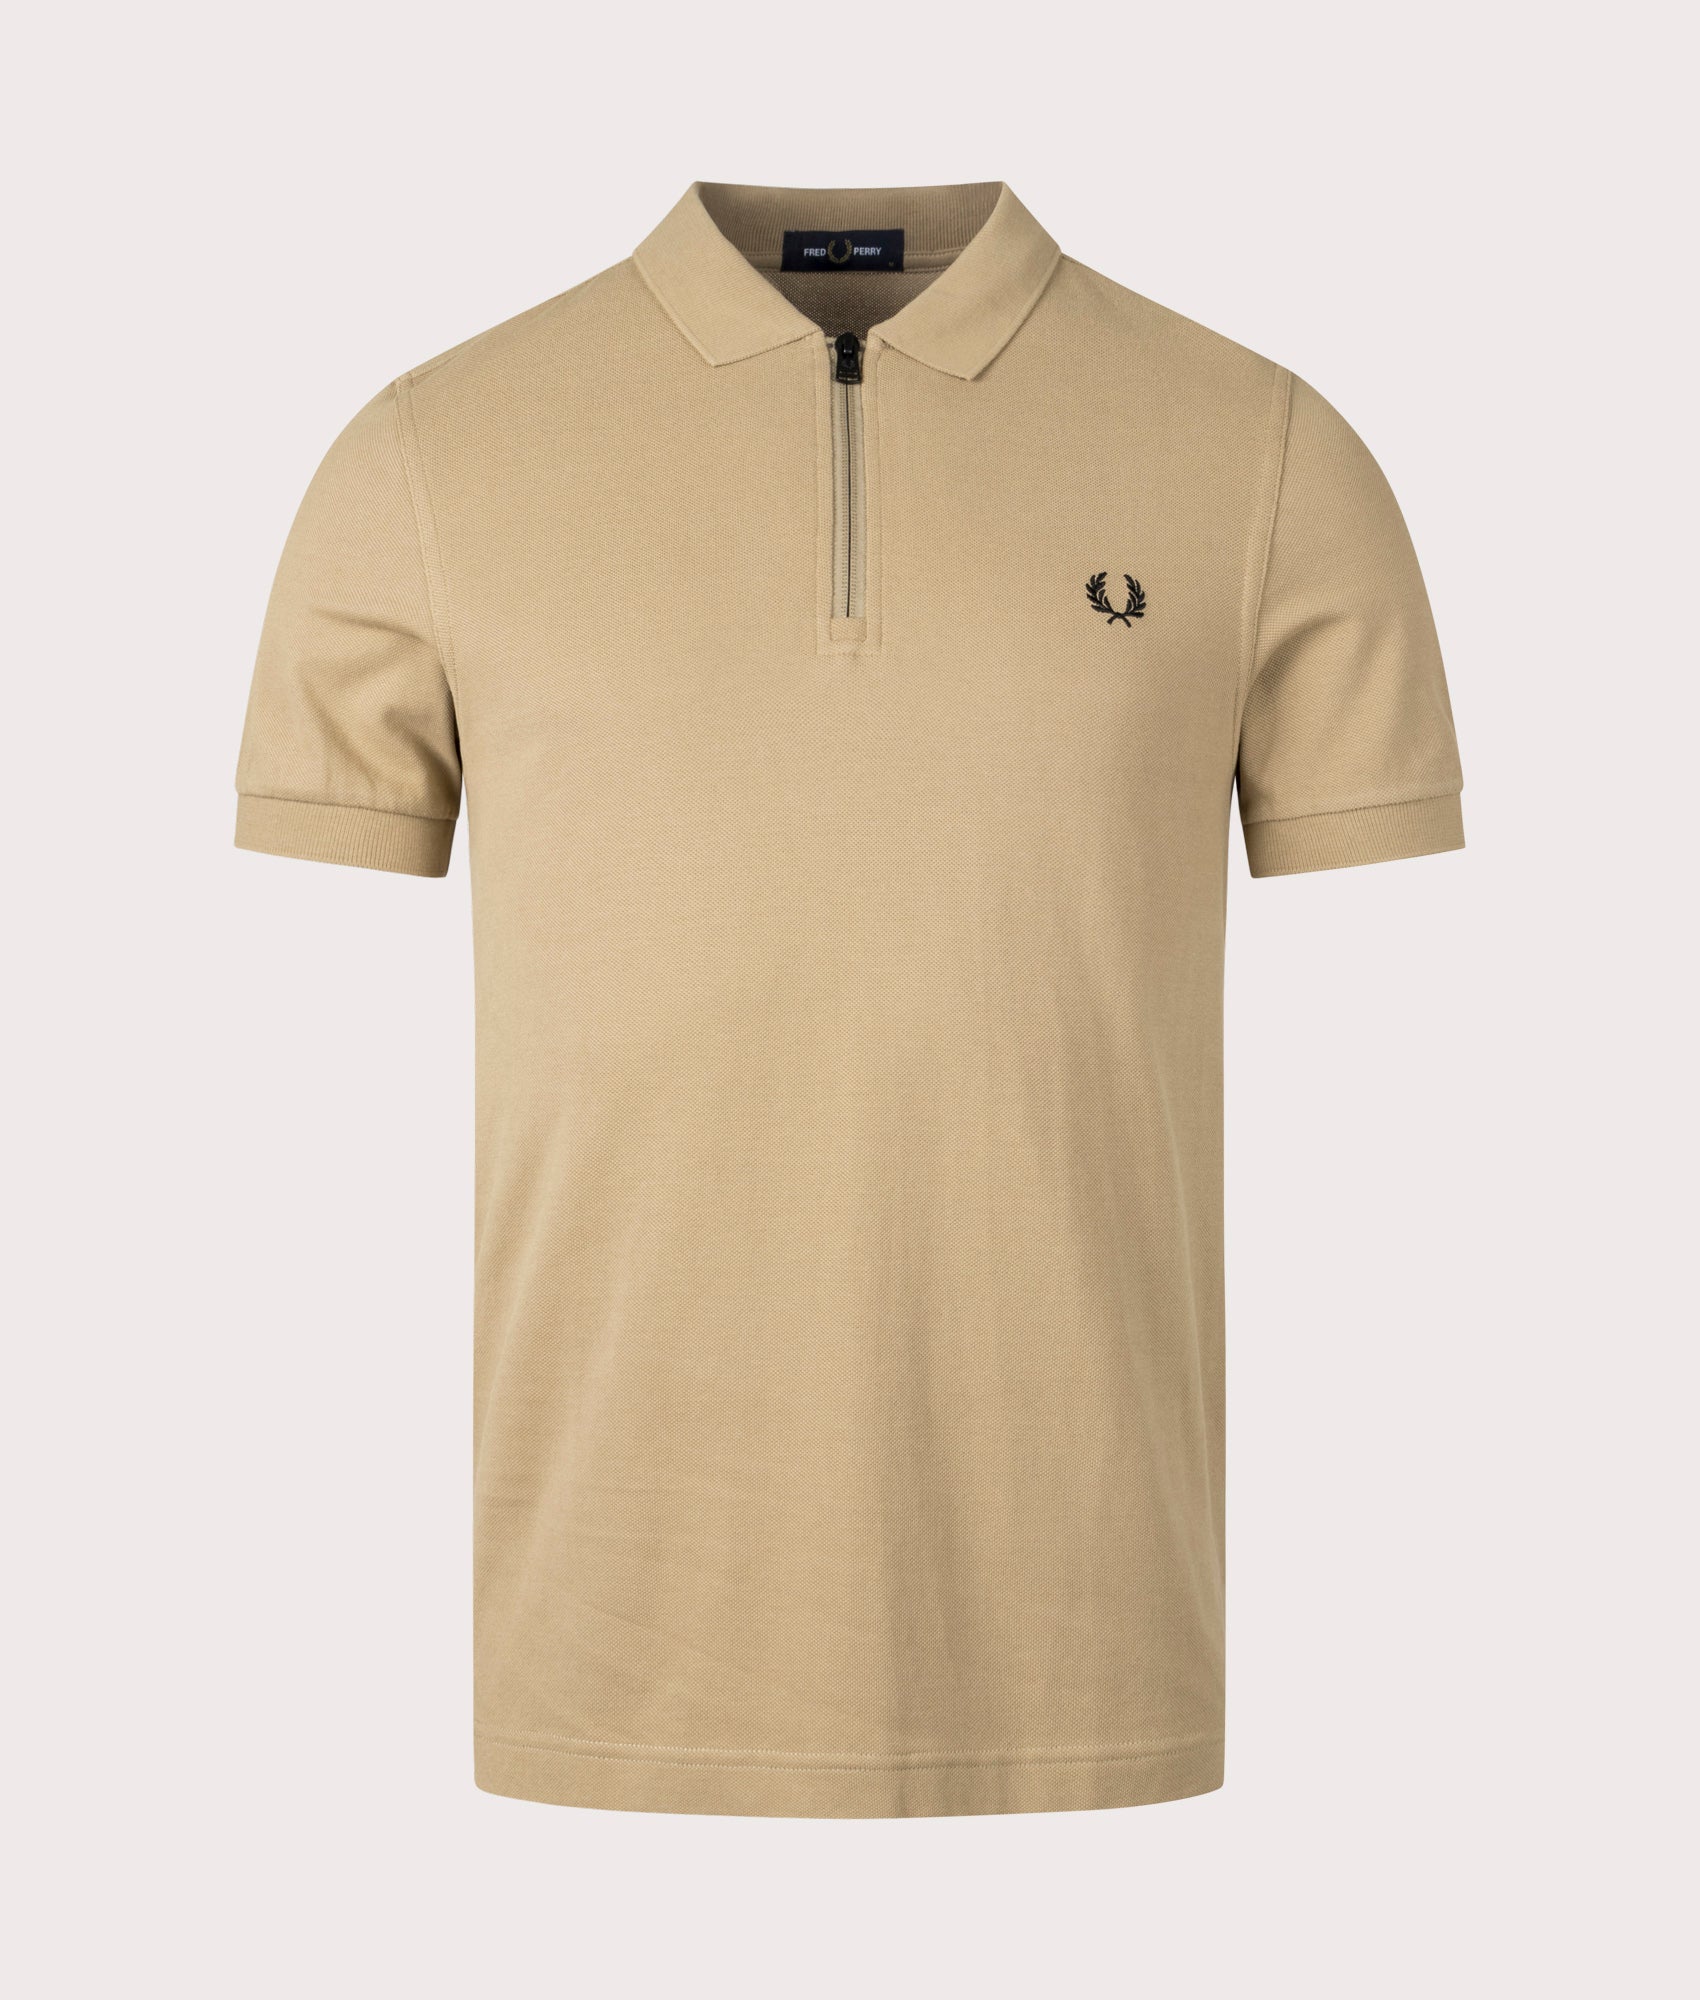 Fred Perry Mens Zip Neck Polo Shirt - Colour: 363 Warm Stone - Size: Large